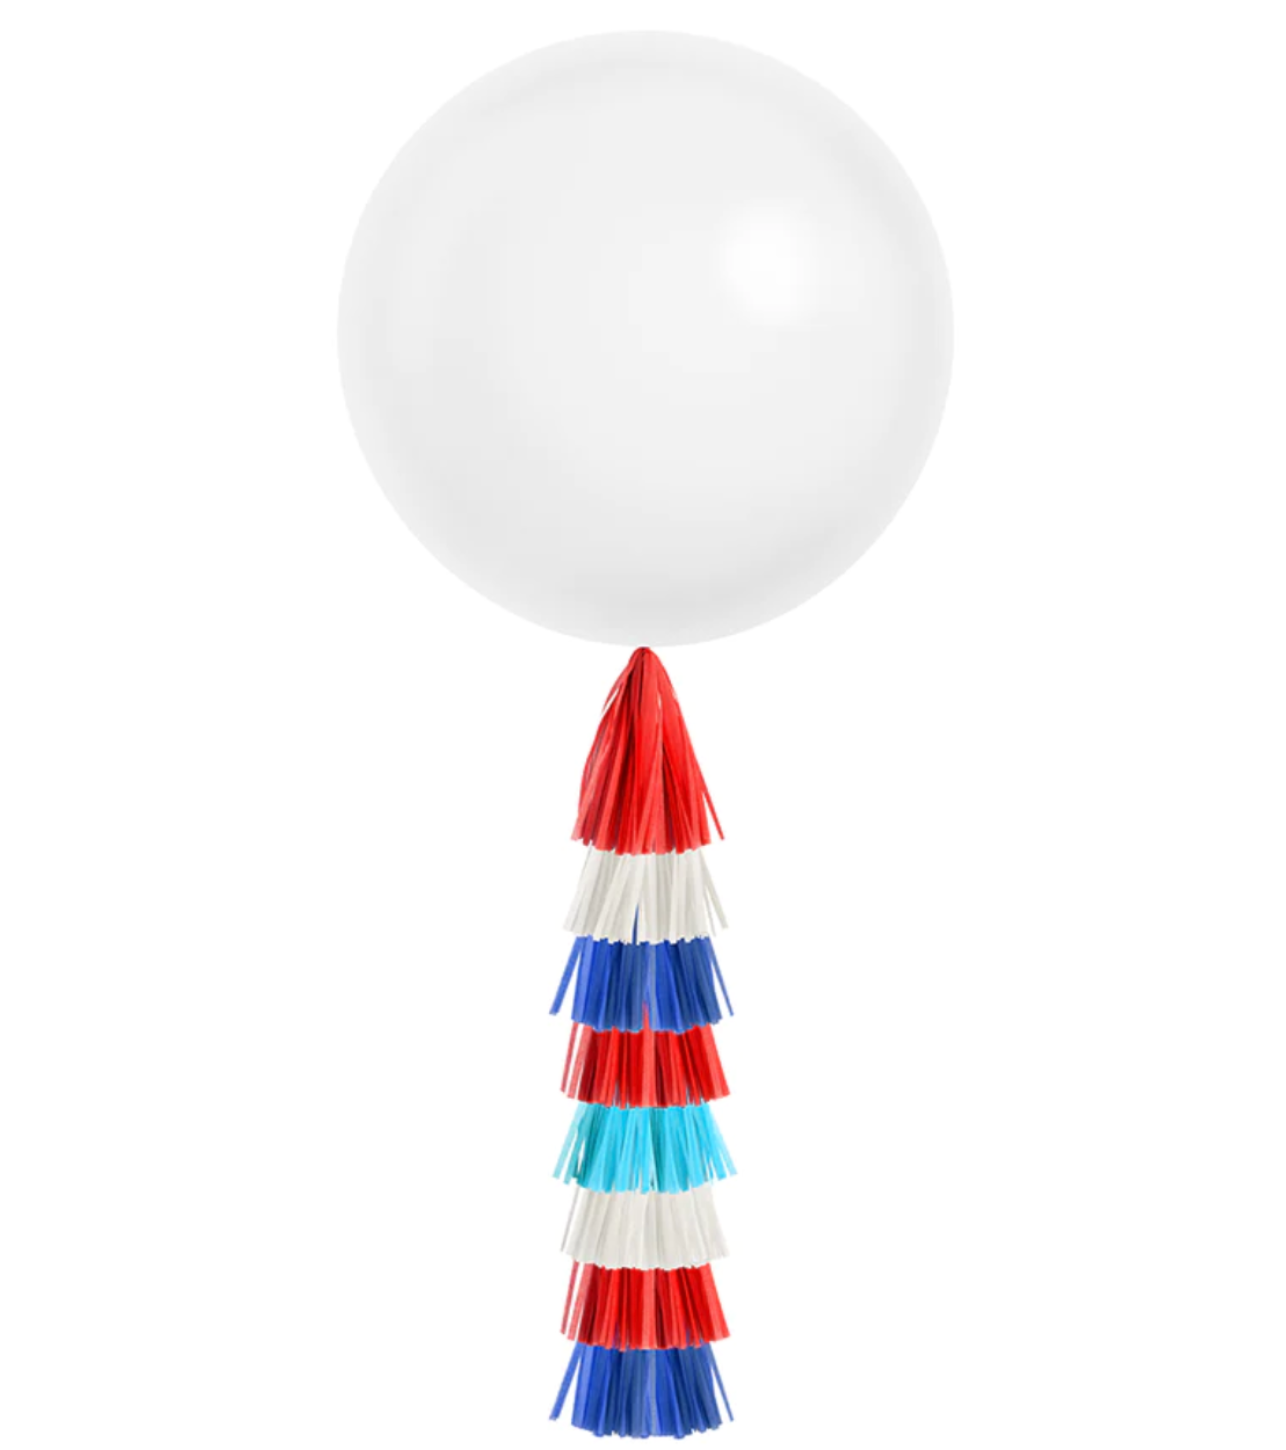 Giant Balloon with Tassels - Red, White & Blue